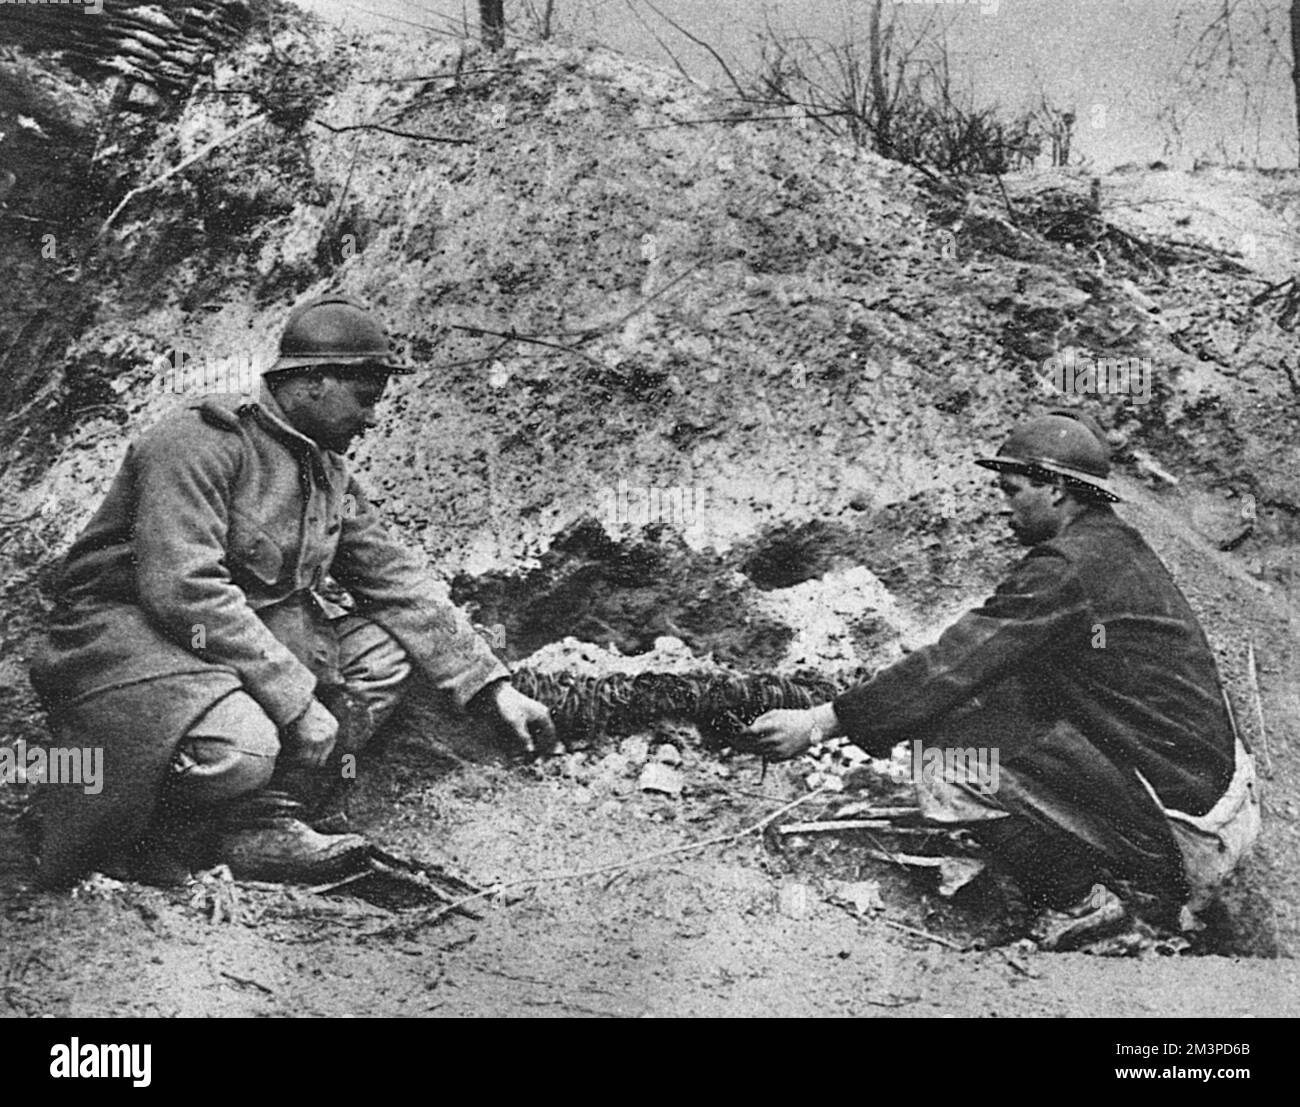 An official rat catcher of the French trenches, delivering his trophies to a non-commissioned officer. Special measures were put in place to combat rat infestation in the trenches: the French army employed rat catchers with dogs to tackle the problem, reportedly being rewarded with a penny per tail.     Date: 1916 Stock Photo